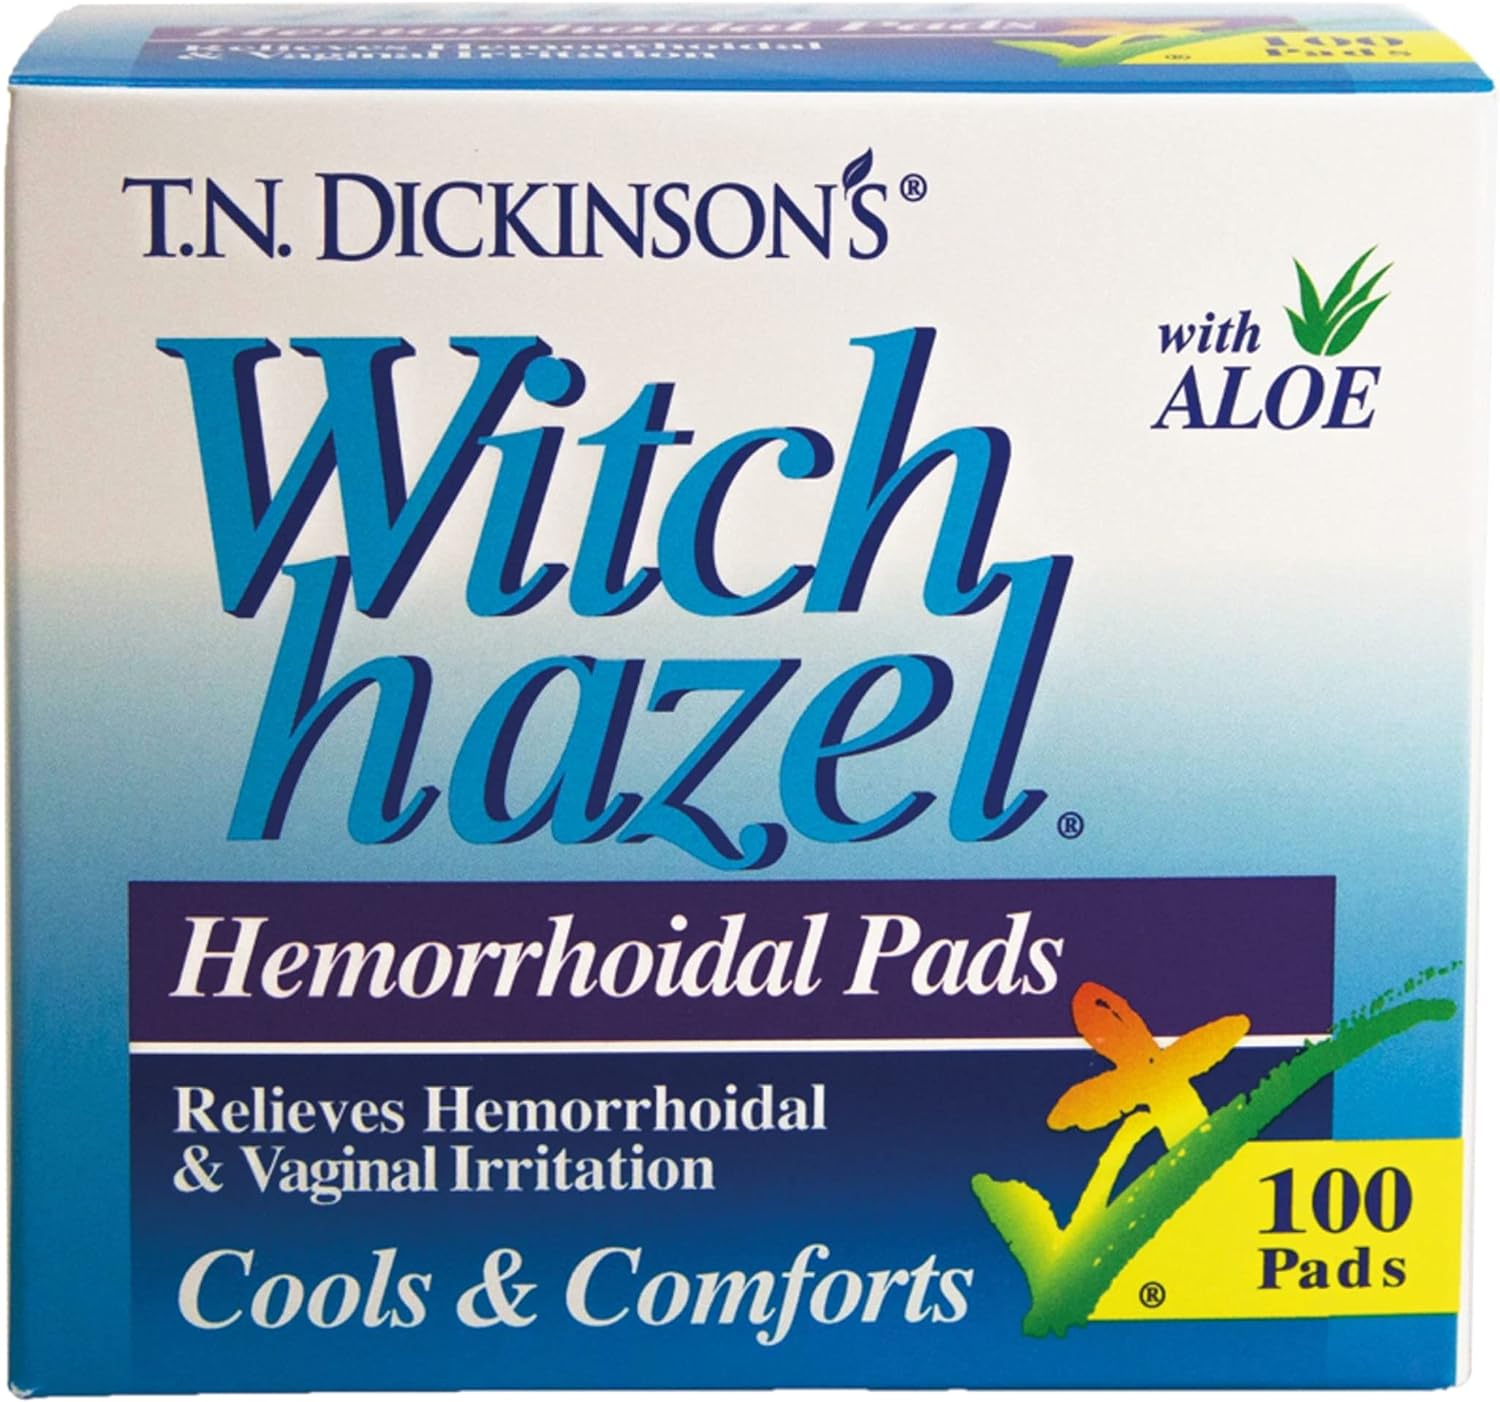 T.N. Dickinson's Hemorrhoidal Pads, Witch Hazel with Aloe, Clear, 100